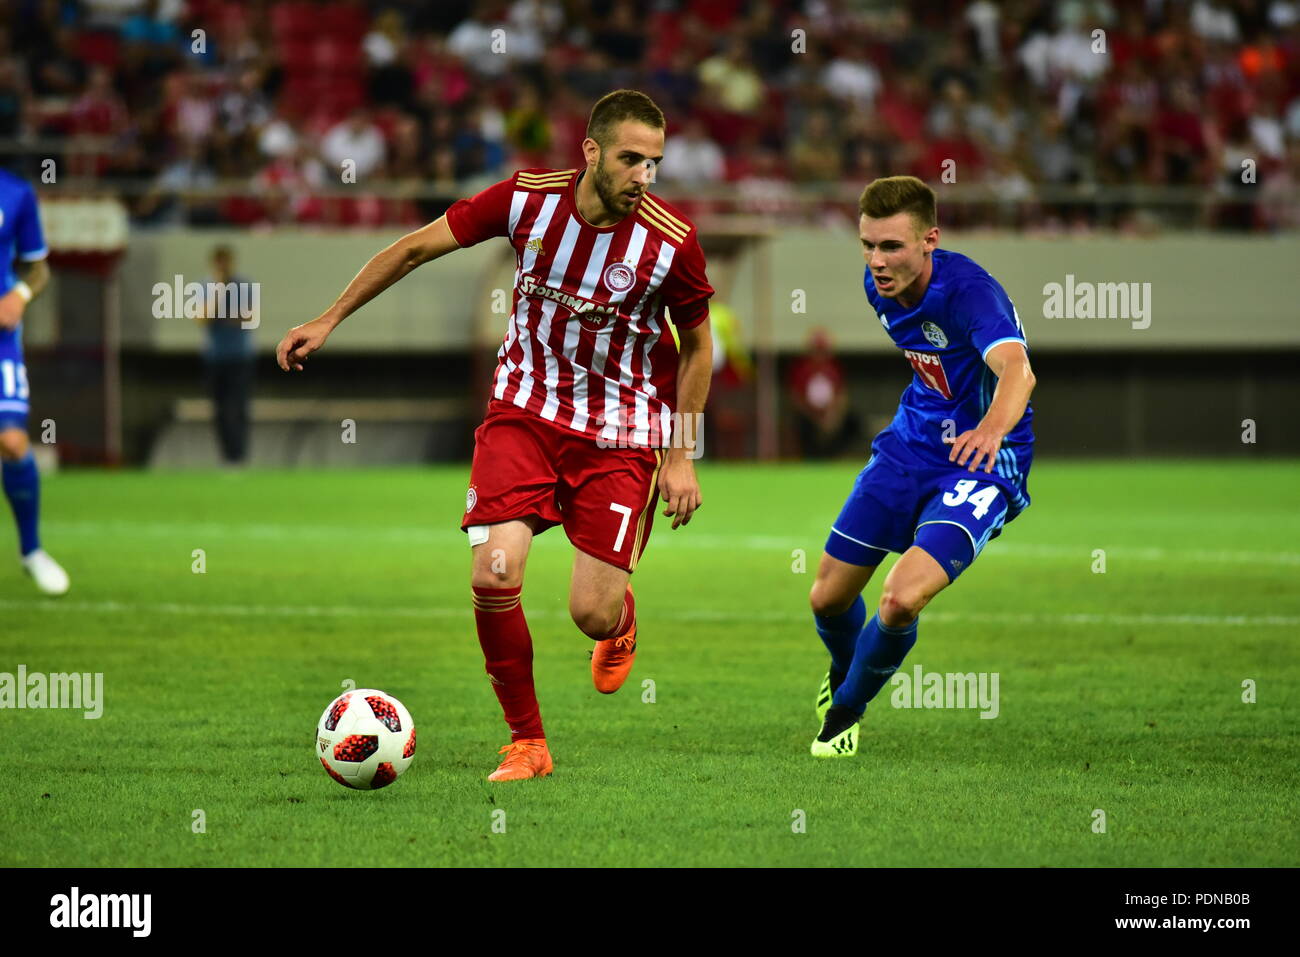 Fc Luzern High Resolution Stock Photography and Images - Alamy